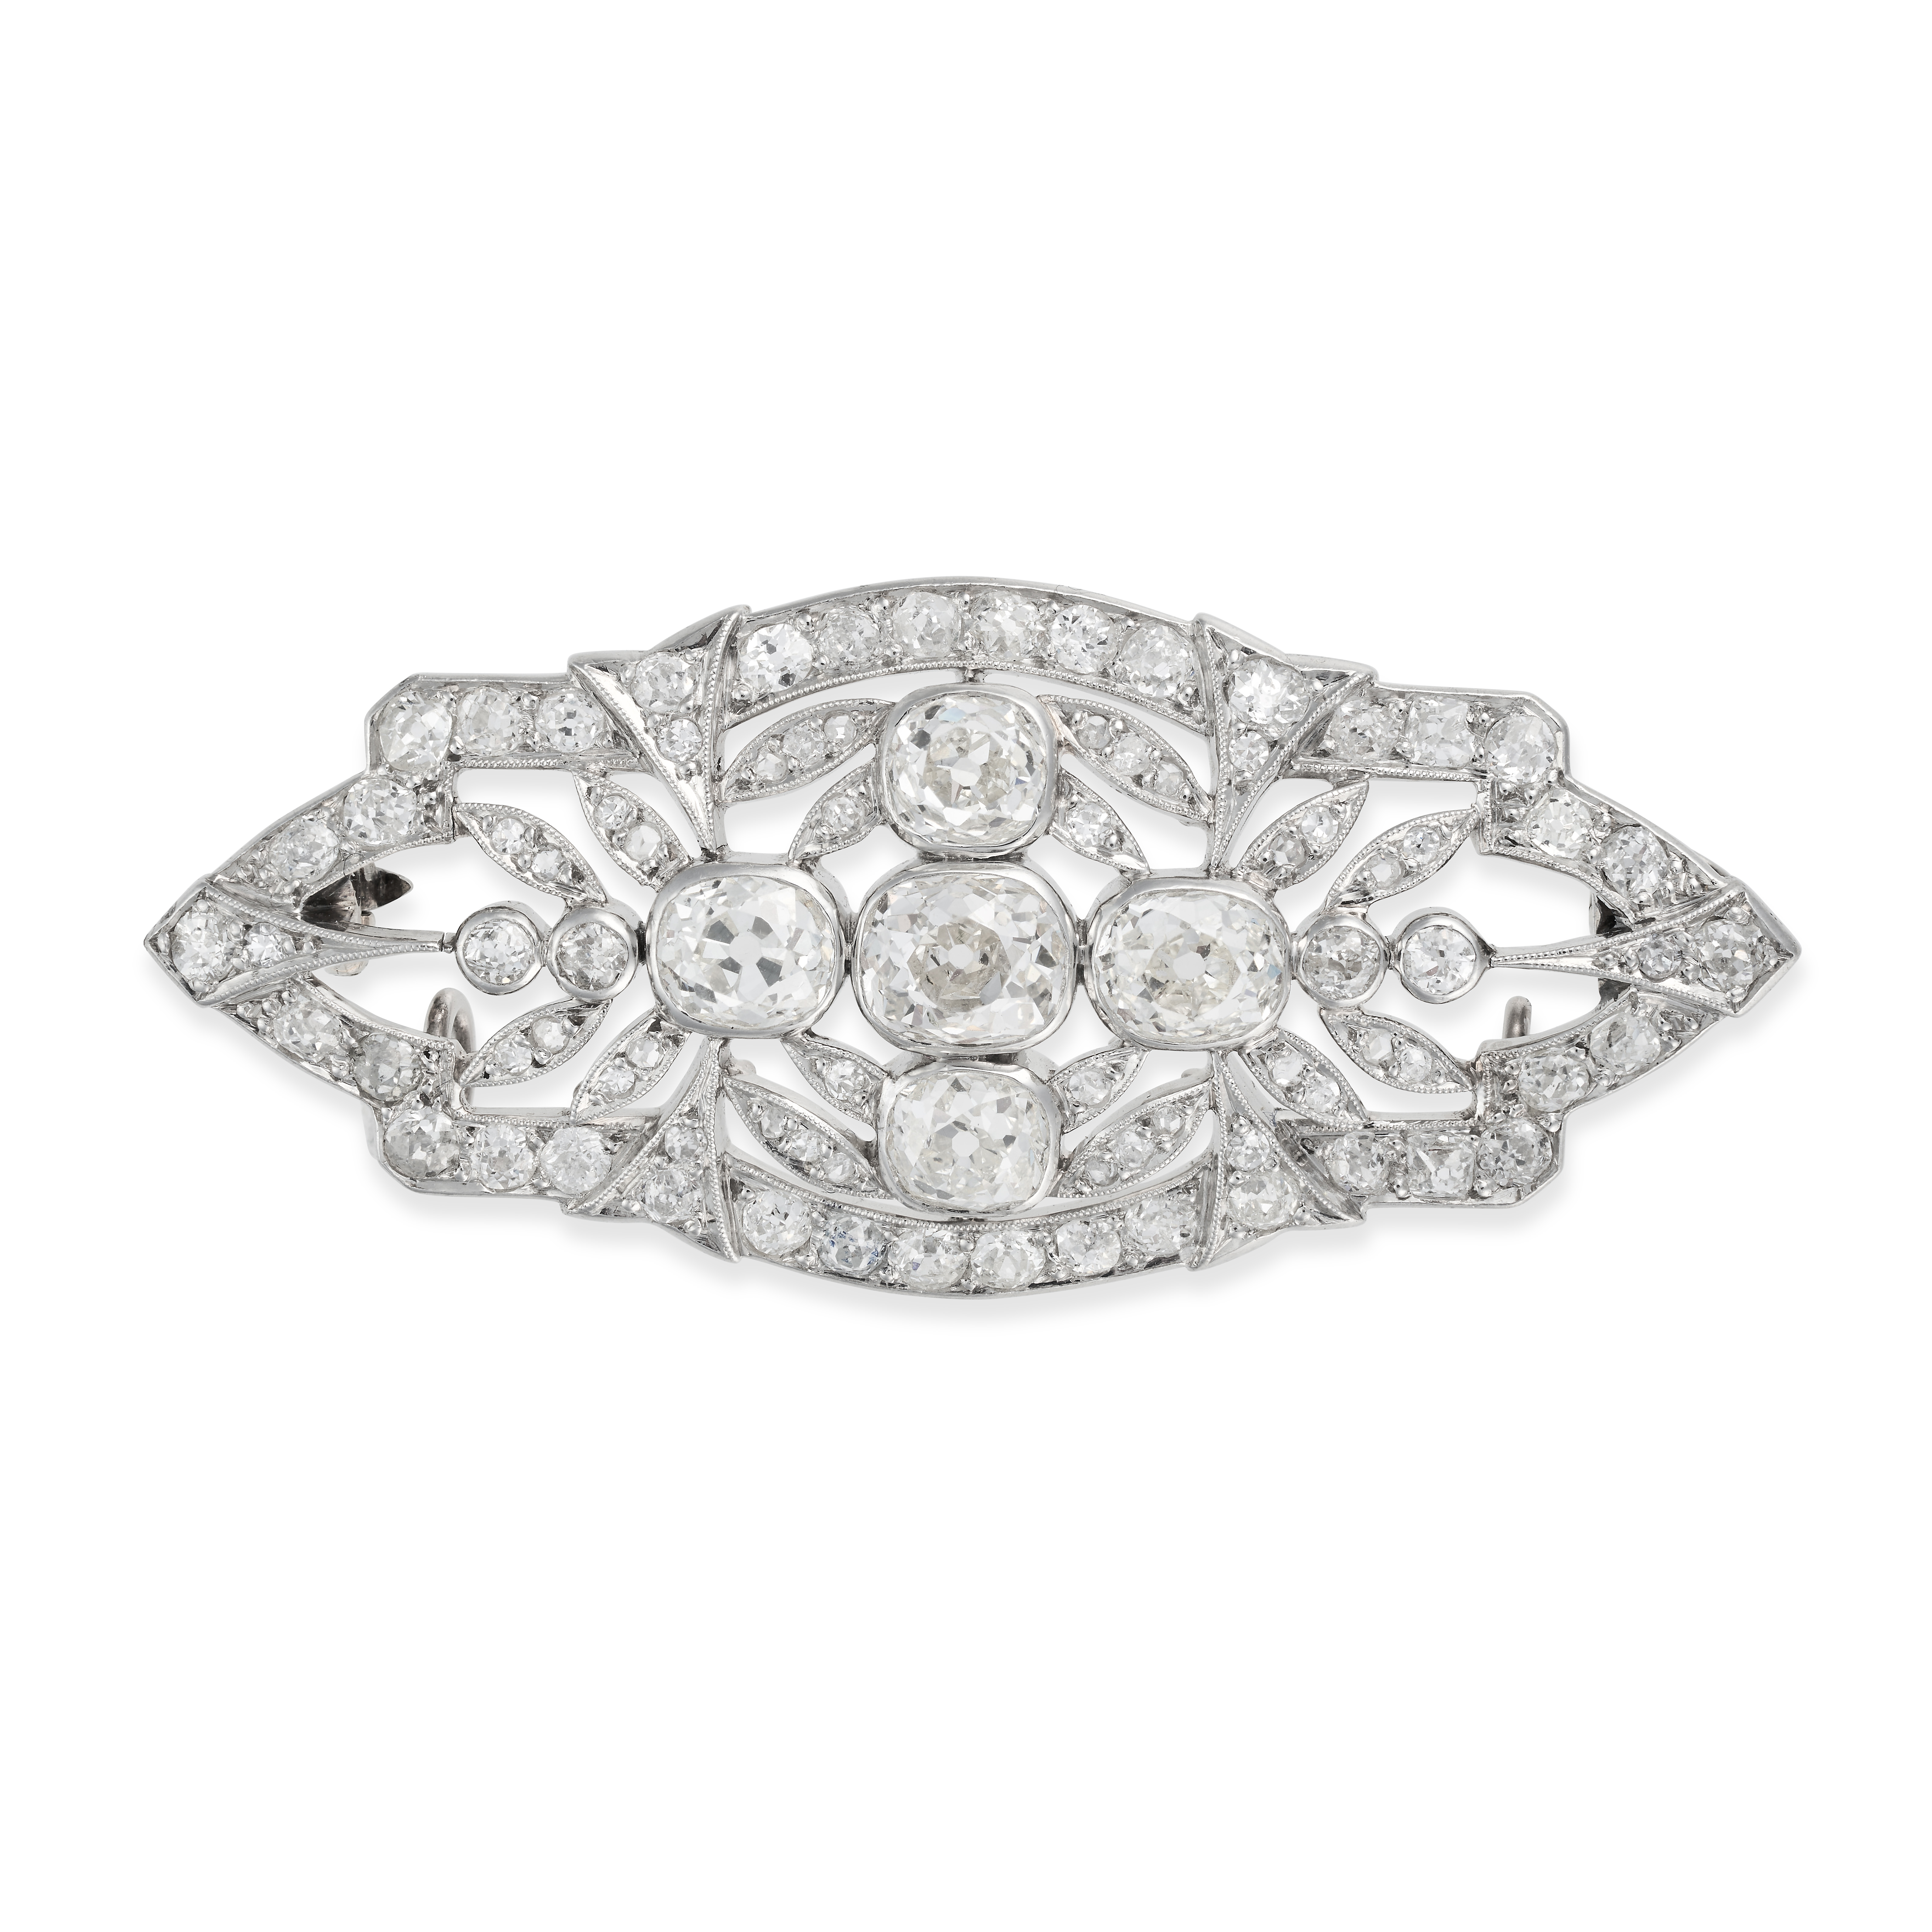 AN ANTIQUE FRENCH DIAMOND BROOCH in 18ct white gold and platinum, the openwork foliate style broo...